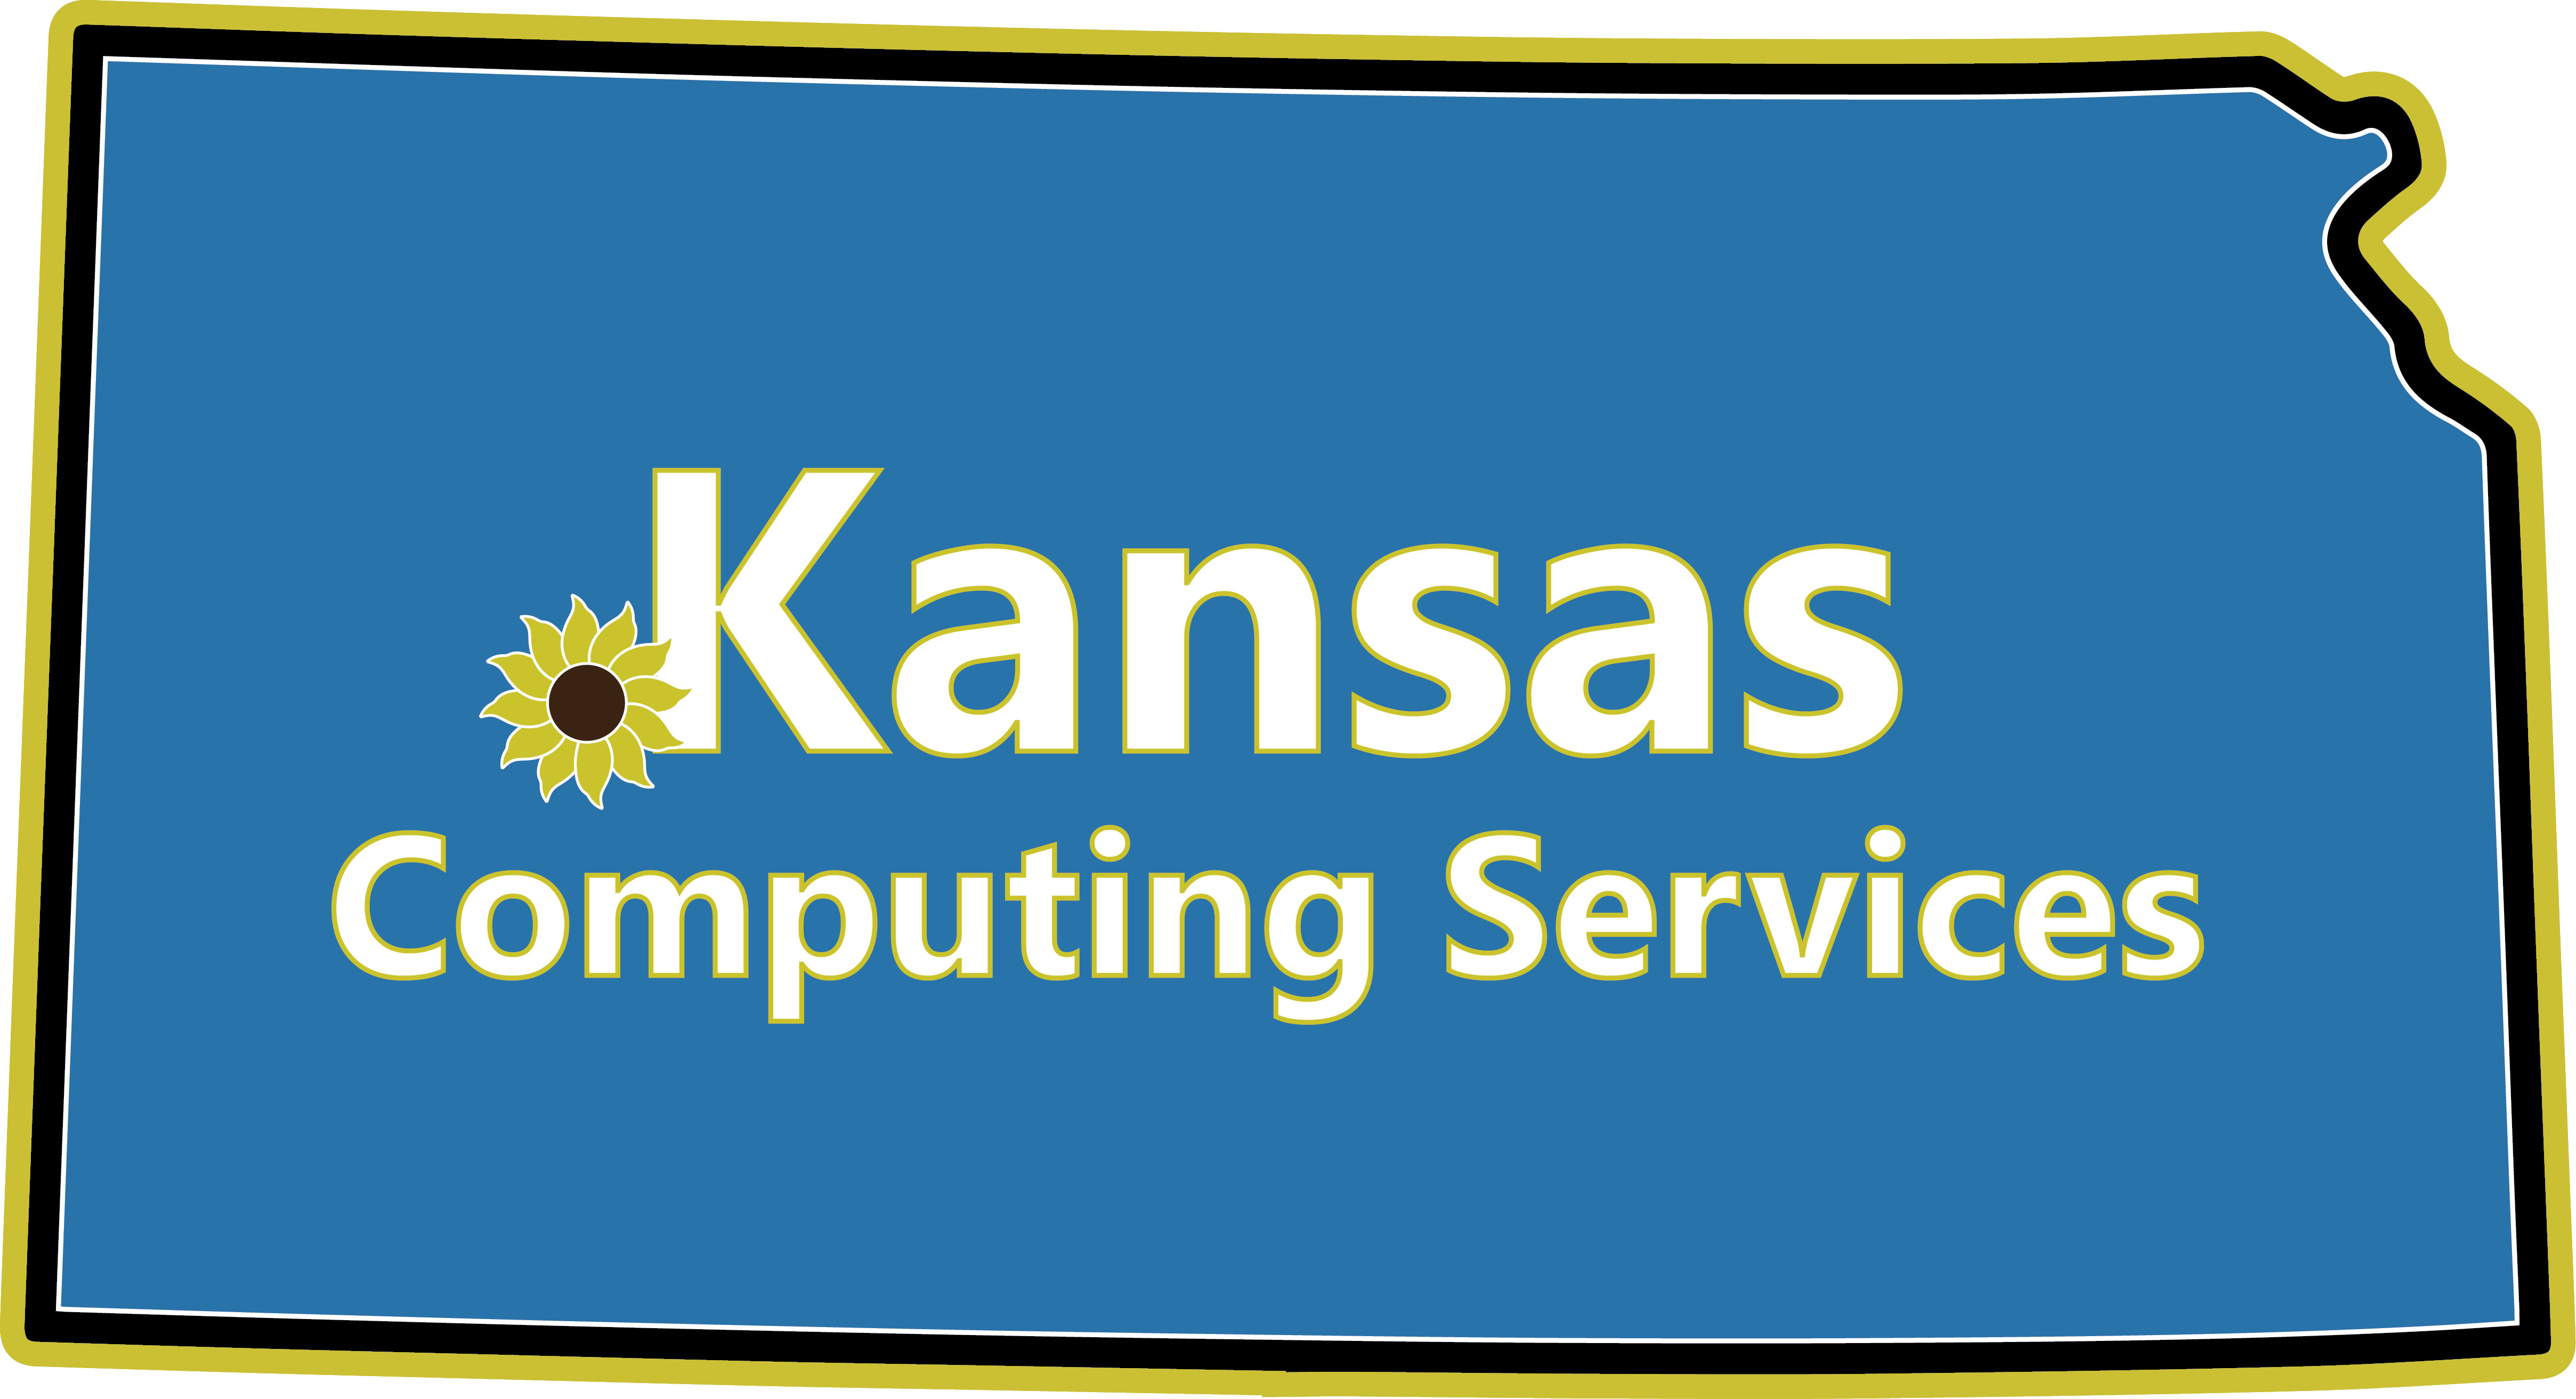 Kansas Computing Services offers IT consulting and services for computers, servers, networks, phones / VoIP, software, and Surveillance Systems to clients in Kansas and Missouri